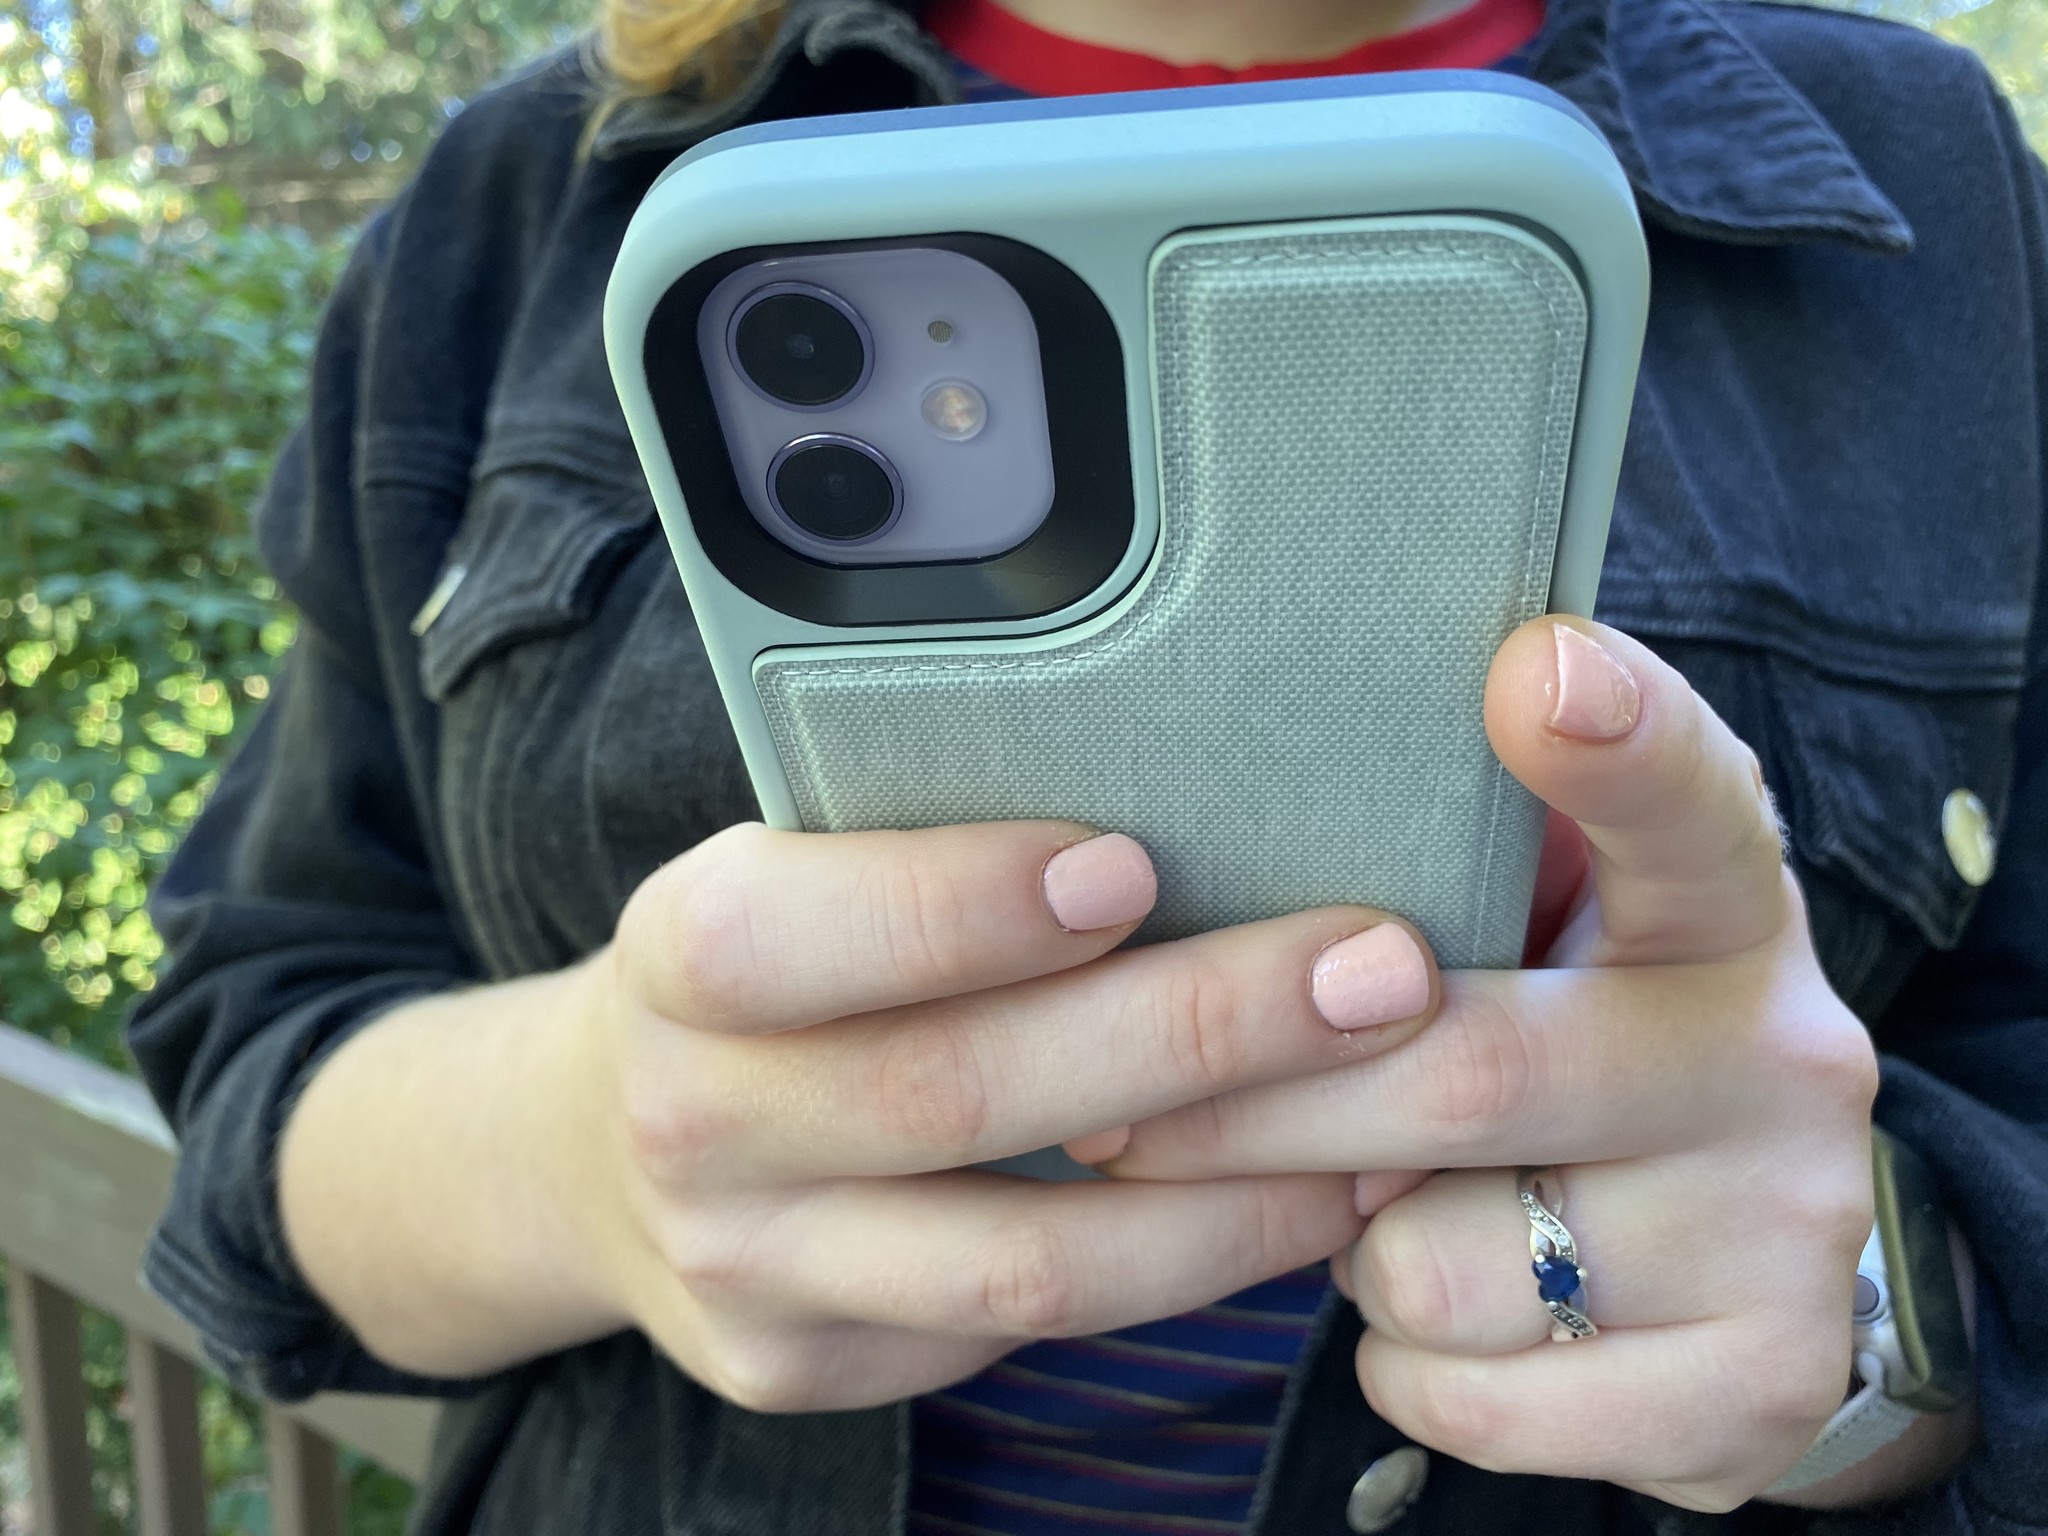 Lifeproof FLiP magnetic iPhone case review